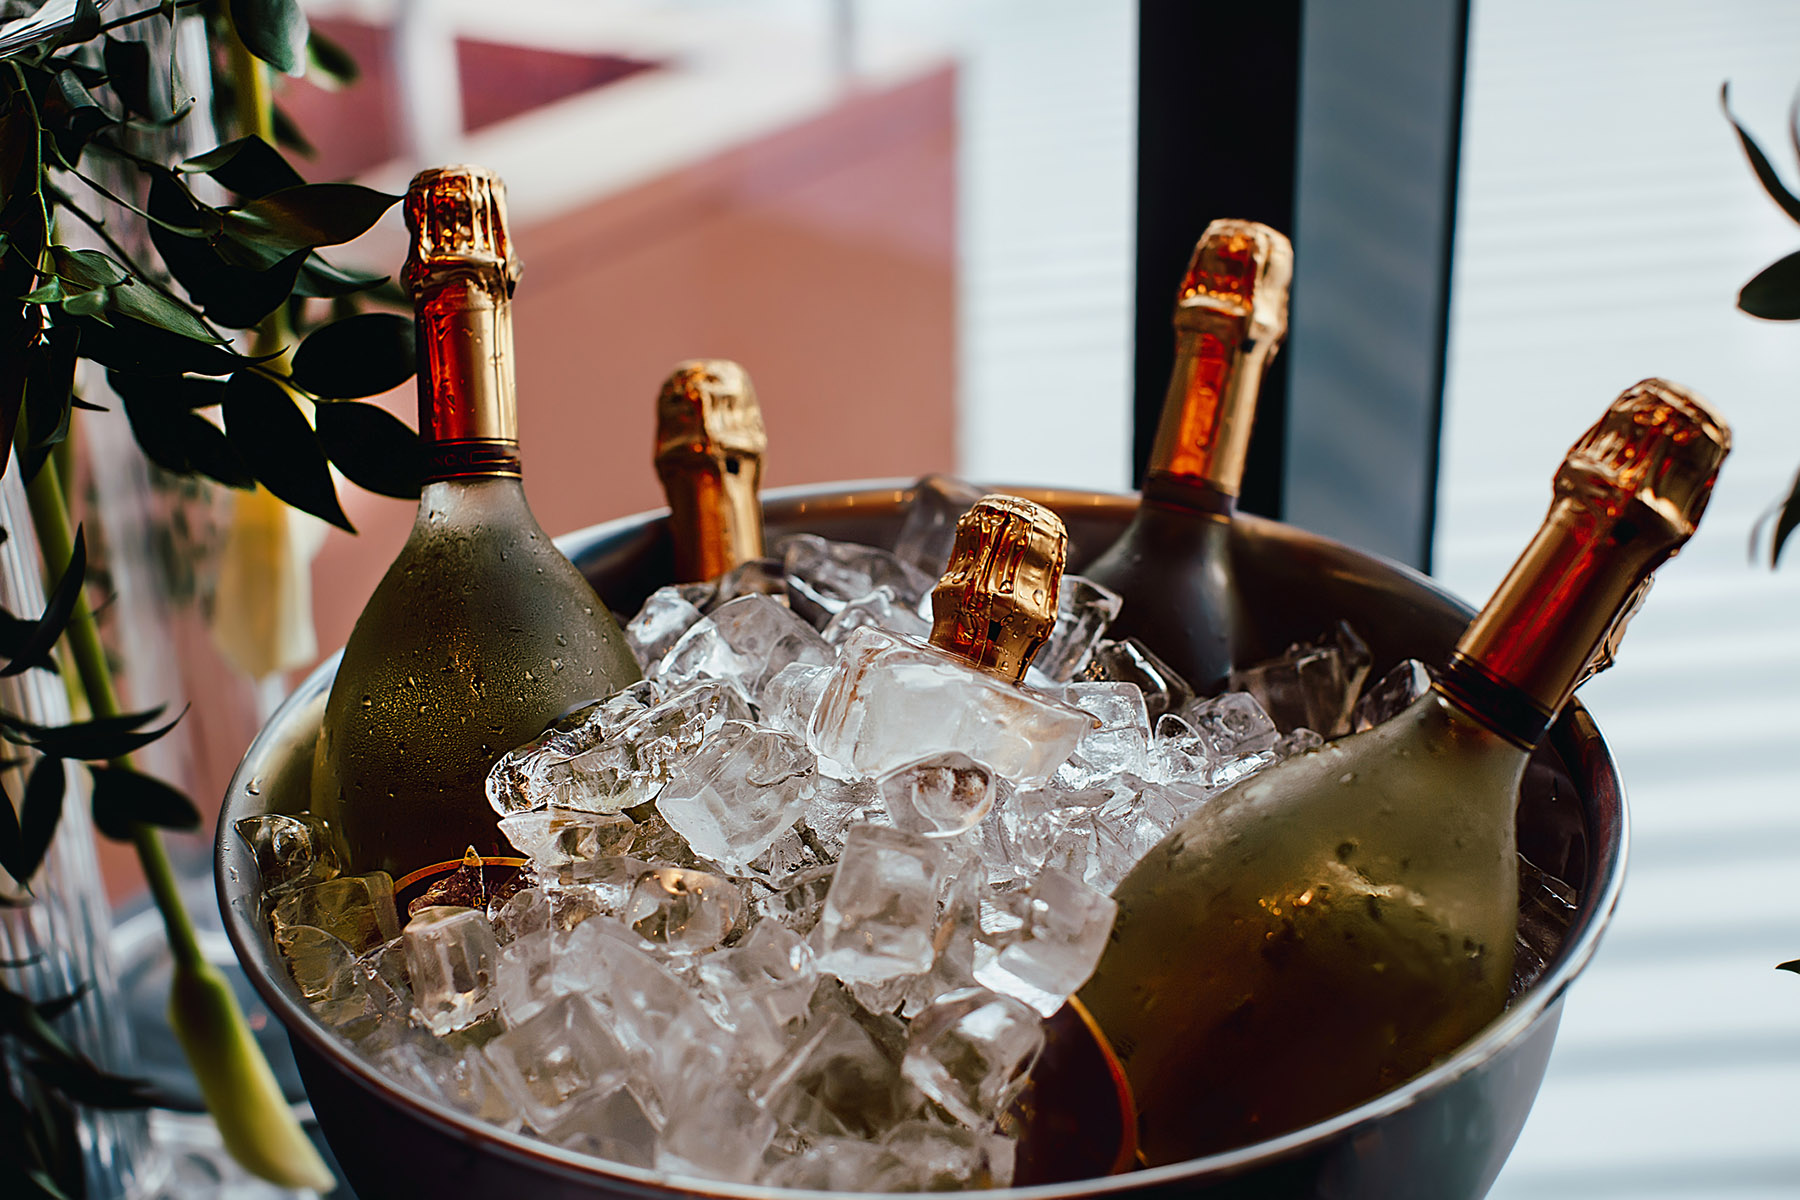 Ice Cubes London | Five wine bottles chill in ice bucket | The Ice Factory London